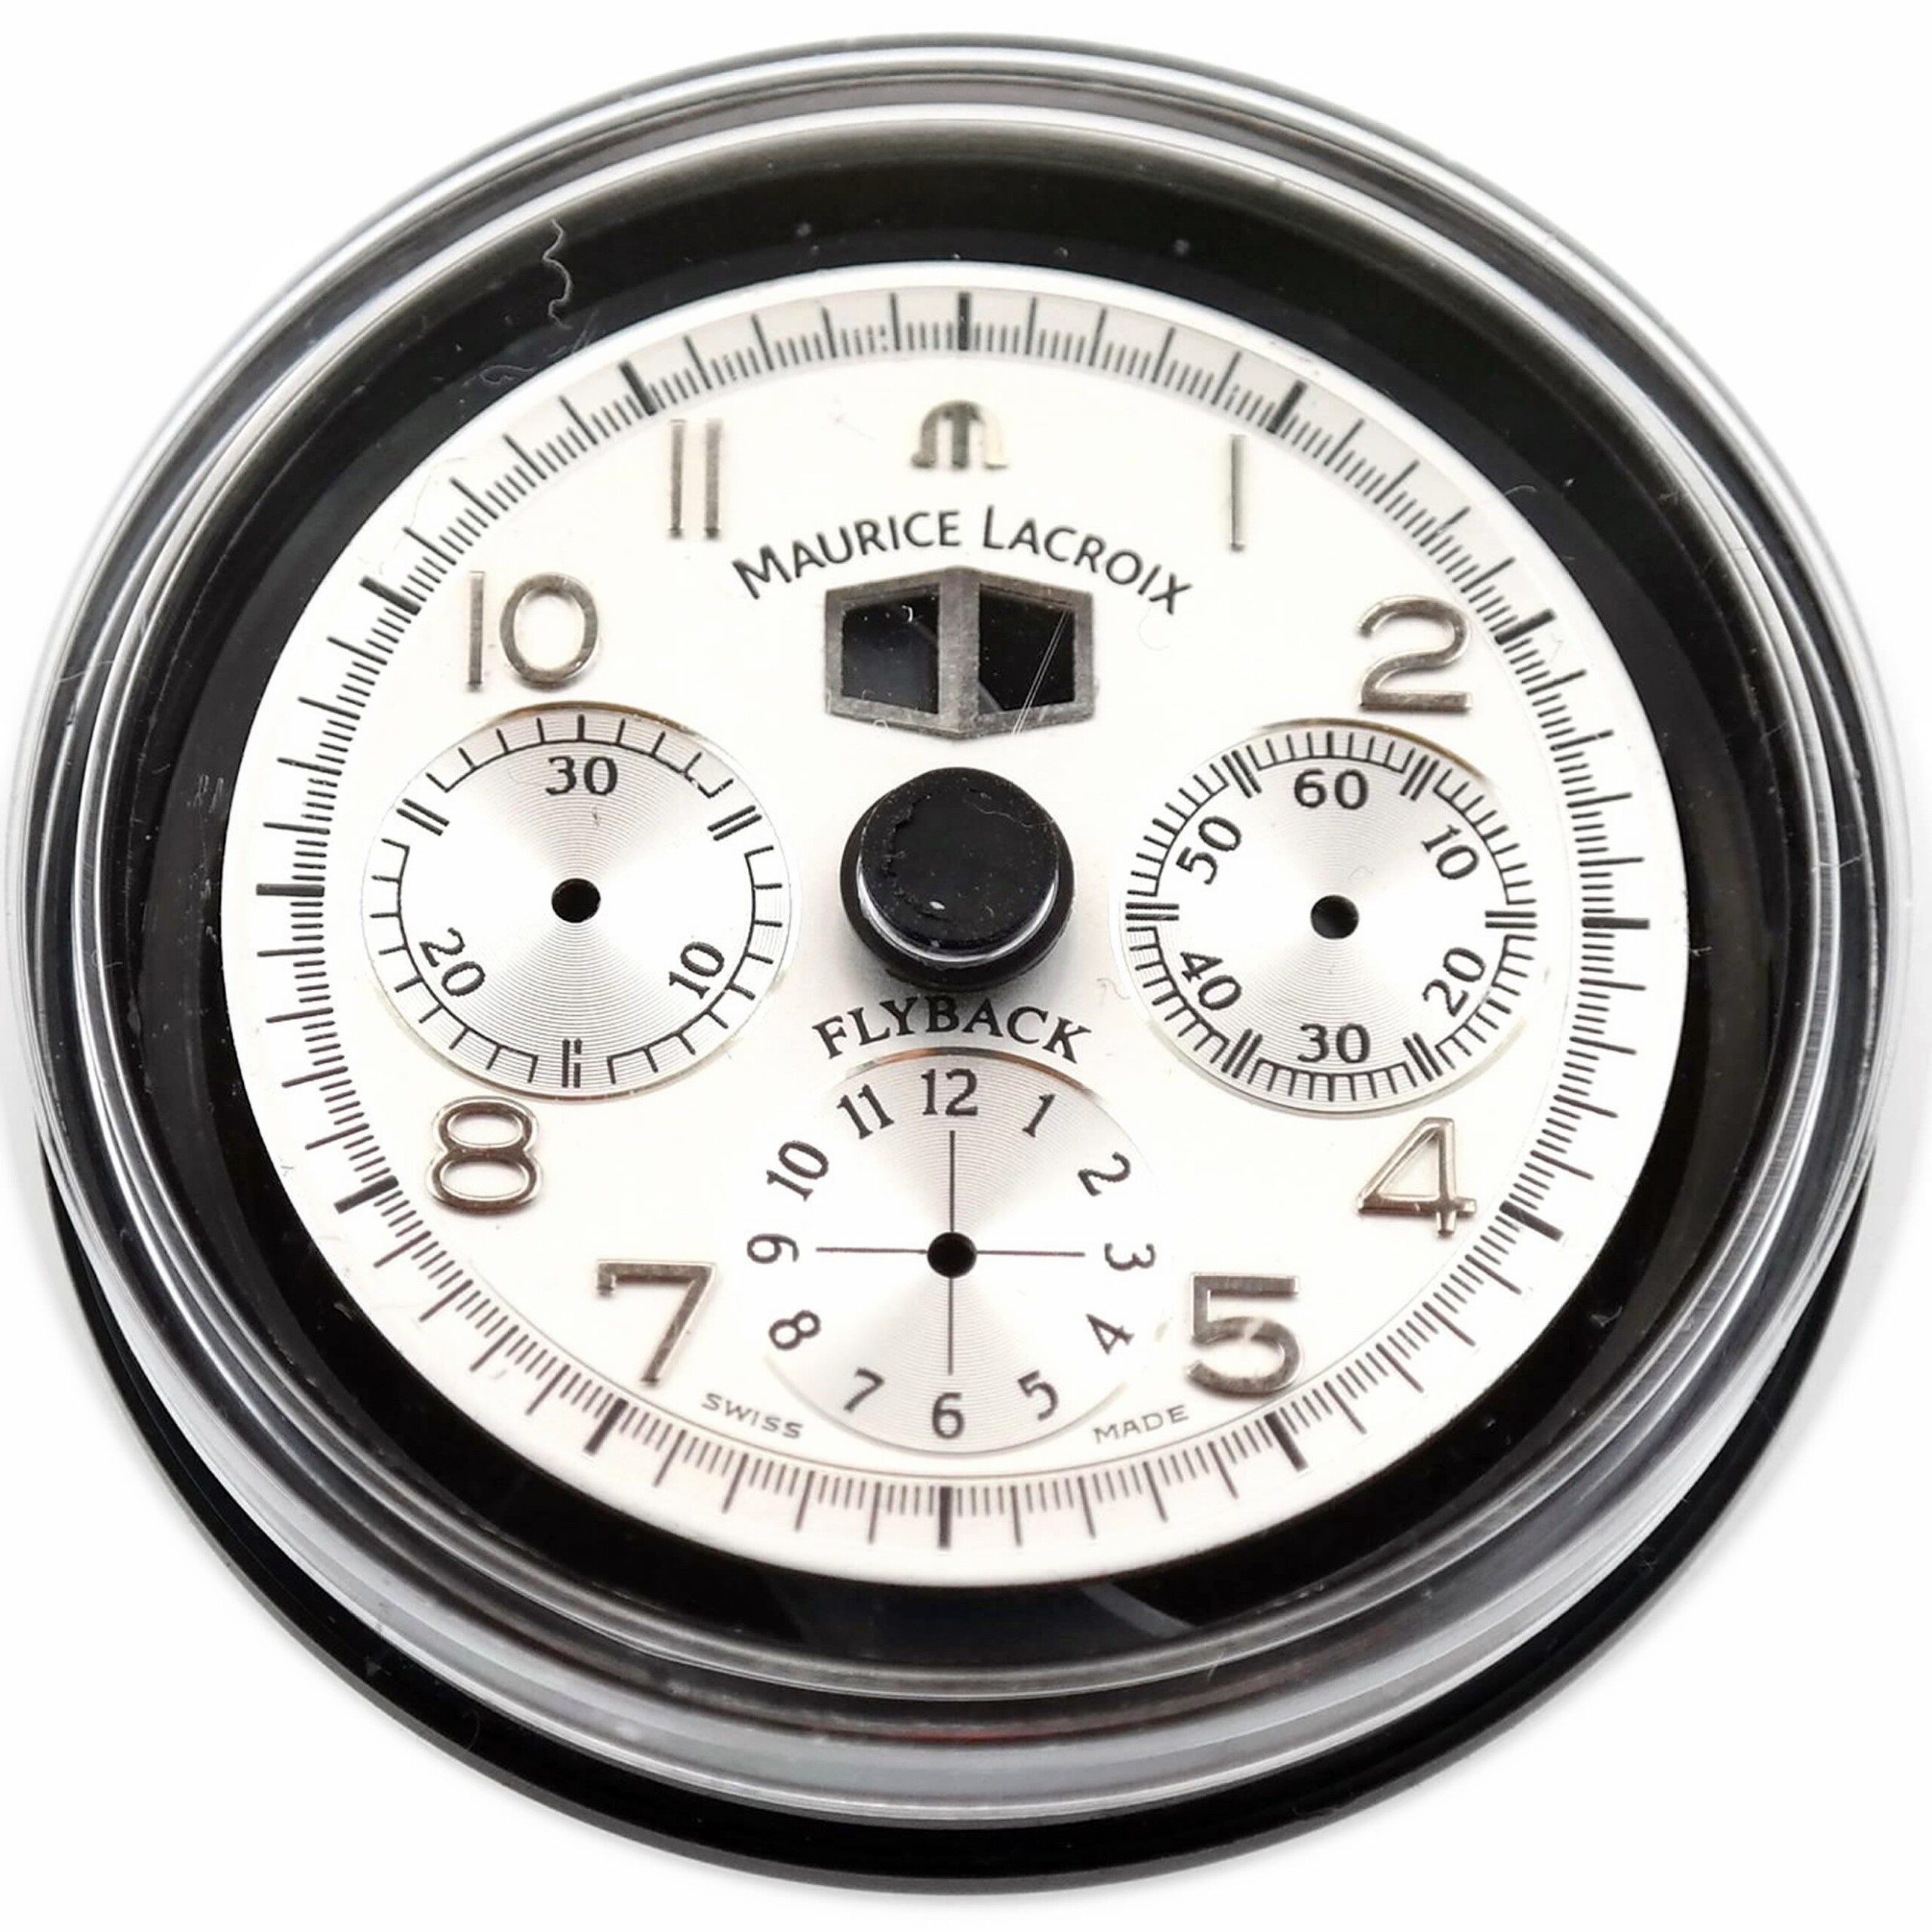 MAURICE LACROIX - Masterpiece Flyback Chronograph - Watch Dial